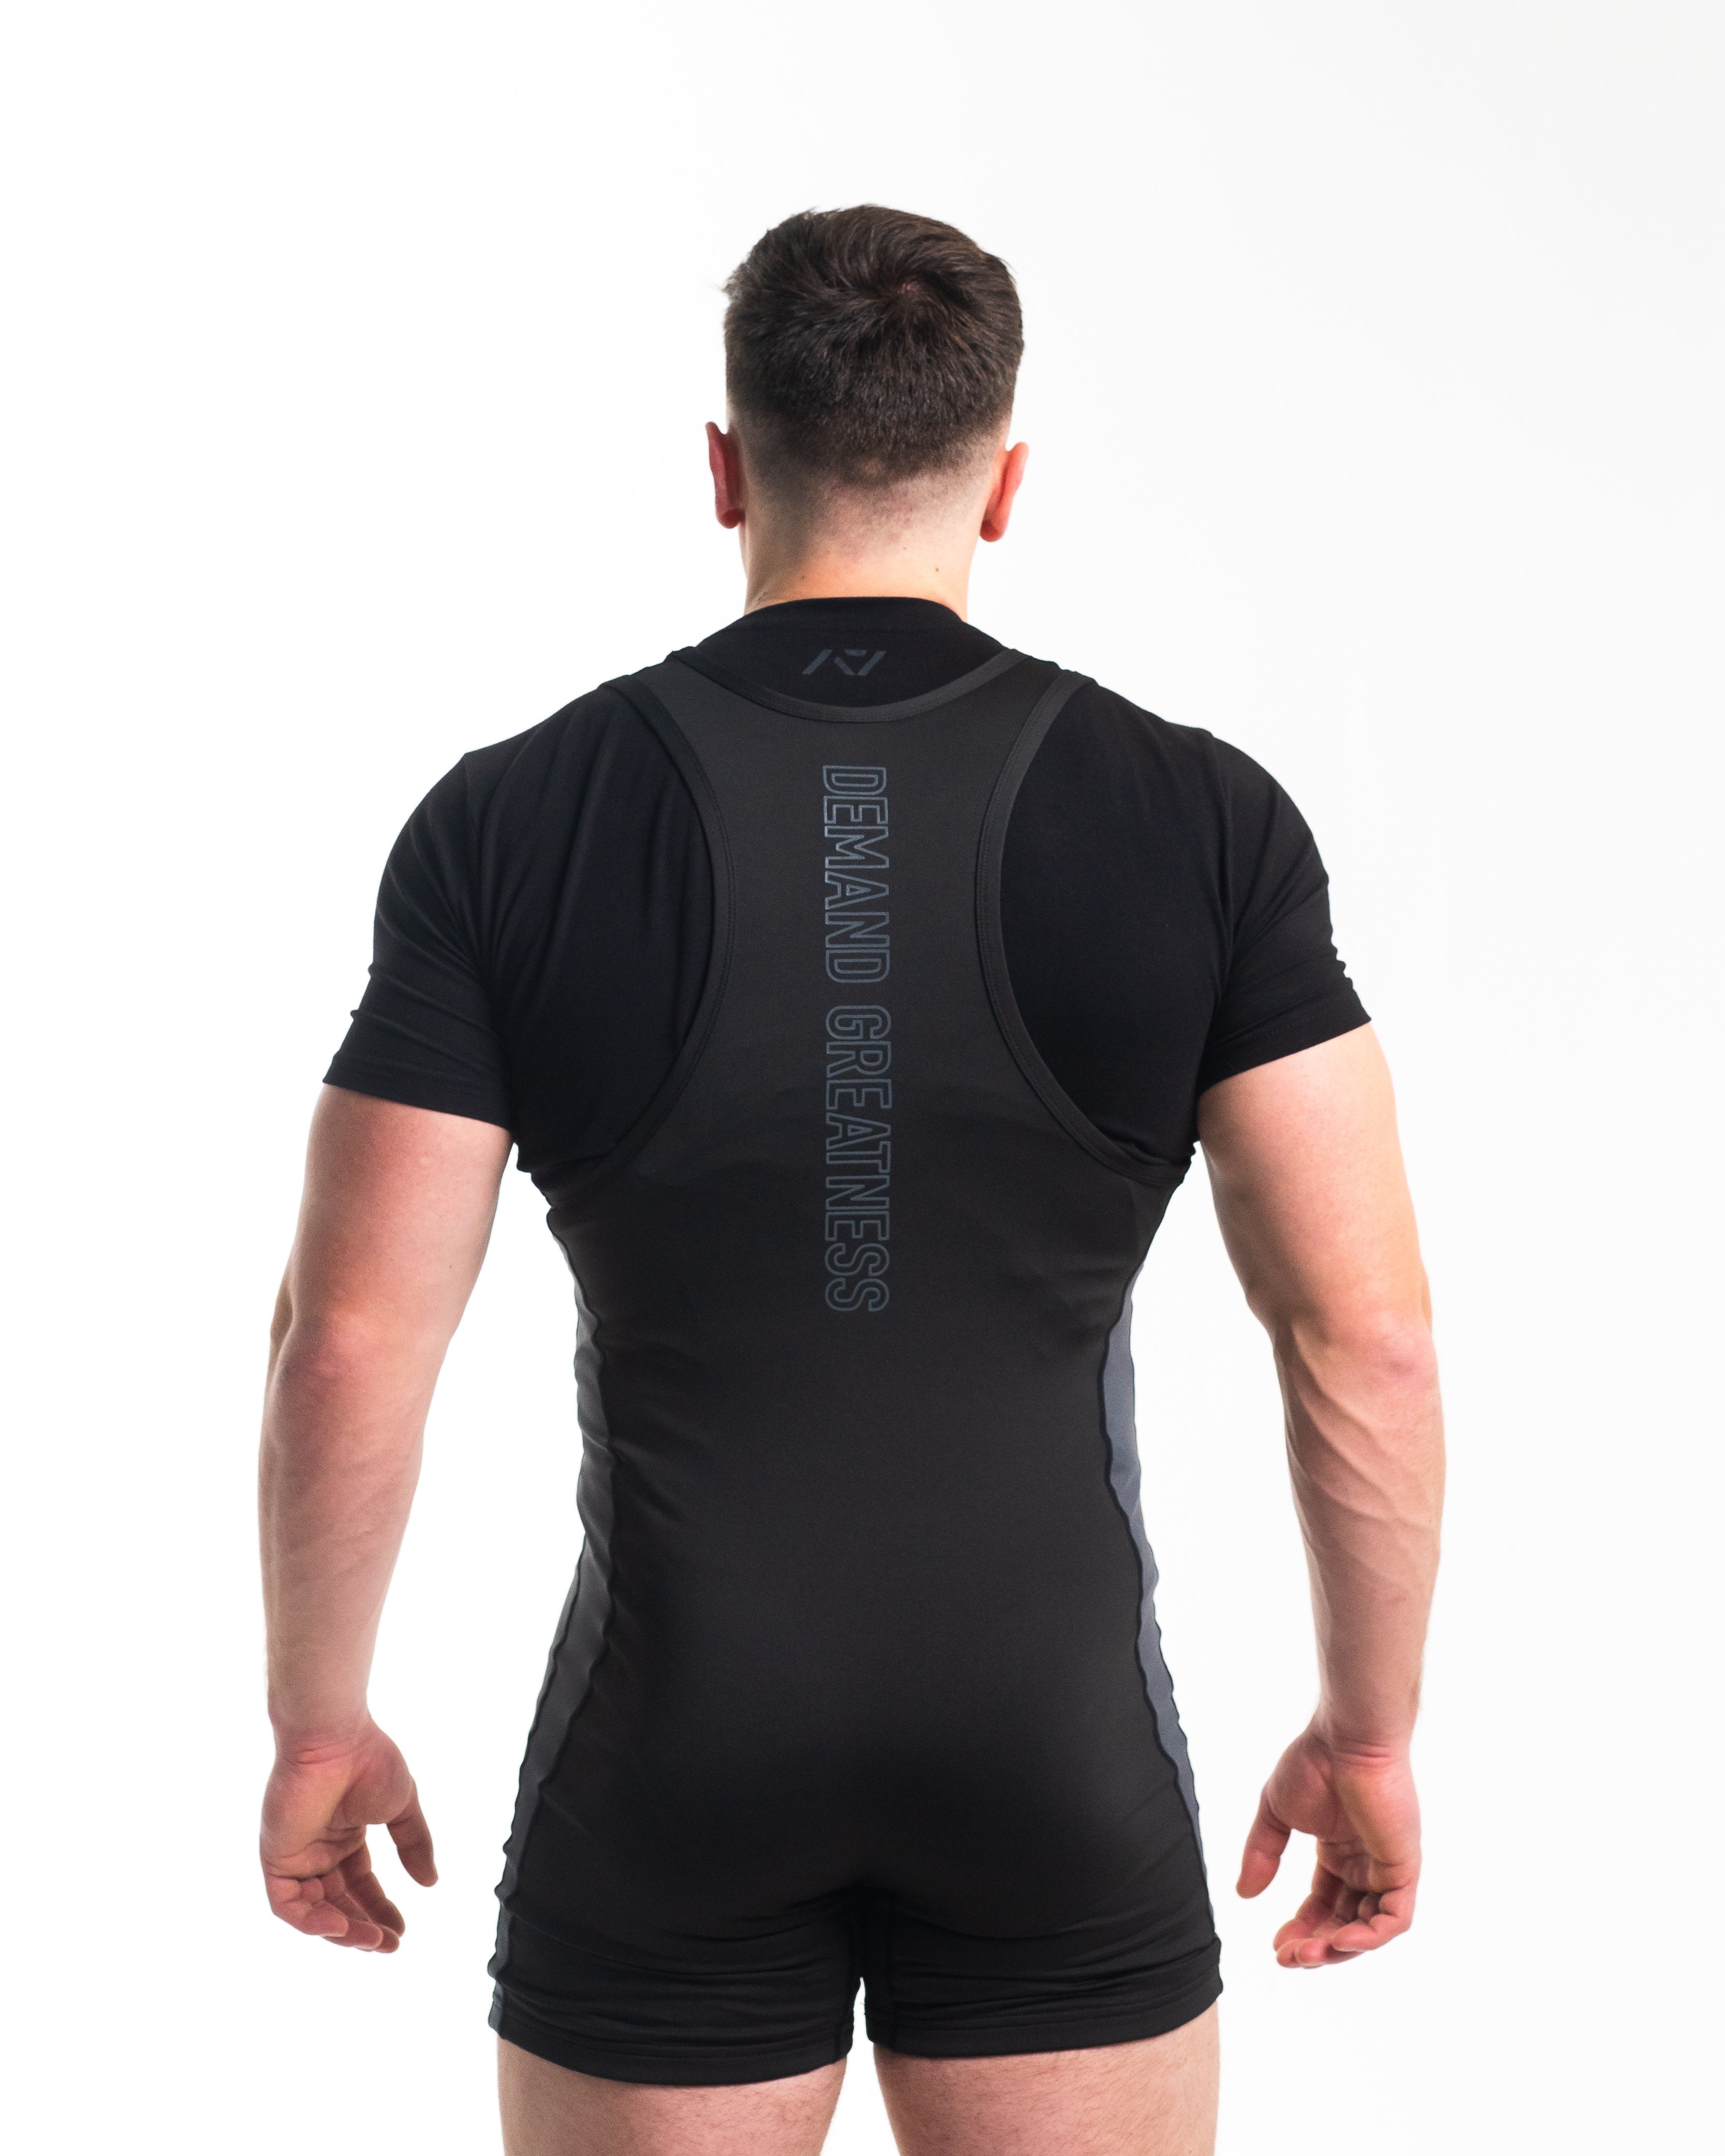 A7 IPF Approved Shadow Stone Luno singlet with extra lat mobility, side panel stitching to guide the squat depth level and curved panel design for a slimming look. The Women's singlet features a tapered waist and additional quad room. The IPF Approved Kit includes Powerlifting Singlet, A7 Meet Shirt, A7 Zebra Wrist Wraps, A7 Deadlift Socks, Hourglass Knee Sleeves (Stiff Knee Sleeves and Rigor Mortis Knee Sleeves). Genouillères powerlifting shipping to France, Spain, Ireland, Germany, Italy, Sweden and EU. 